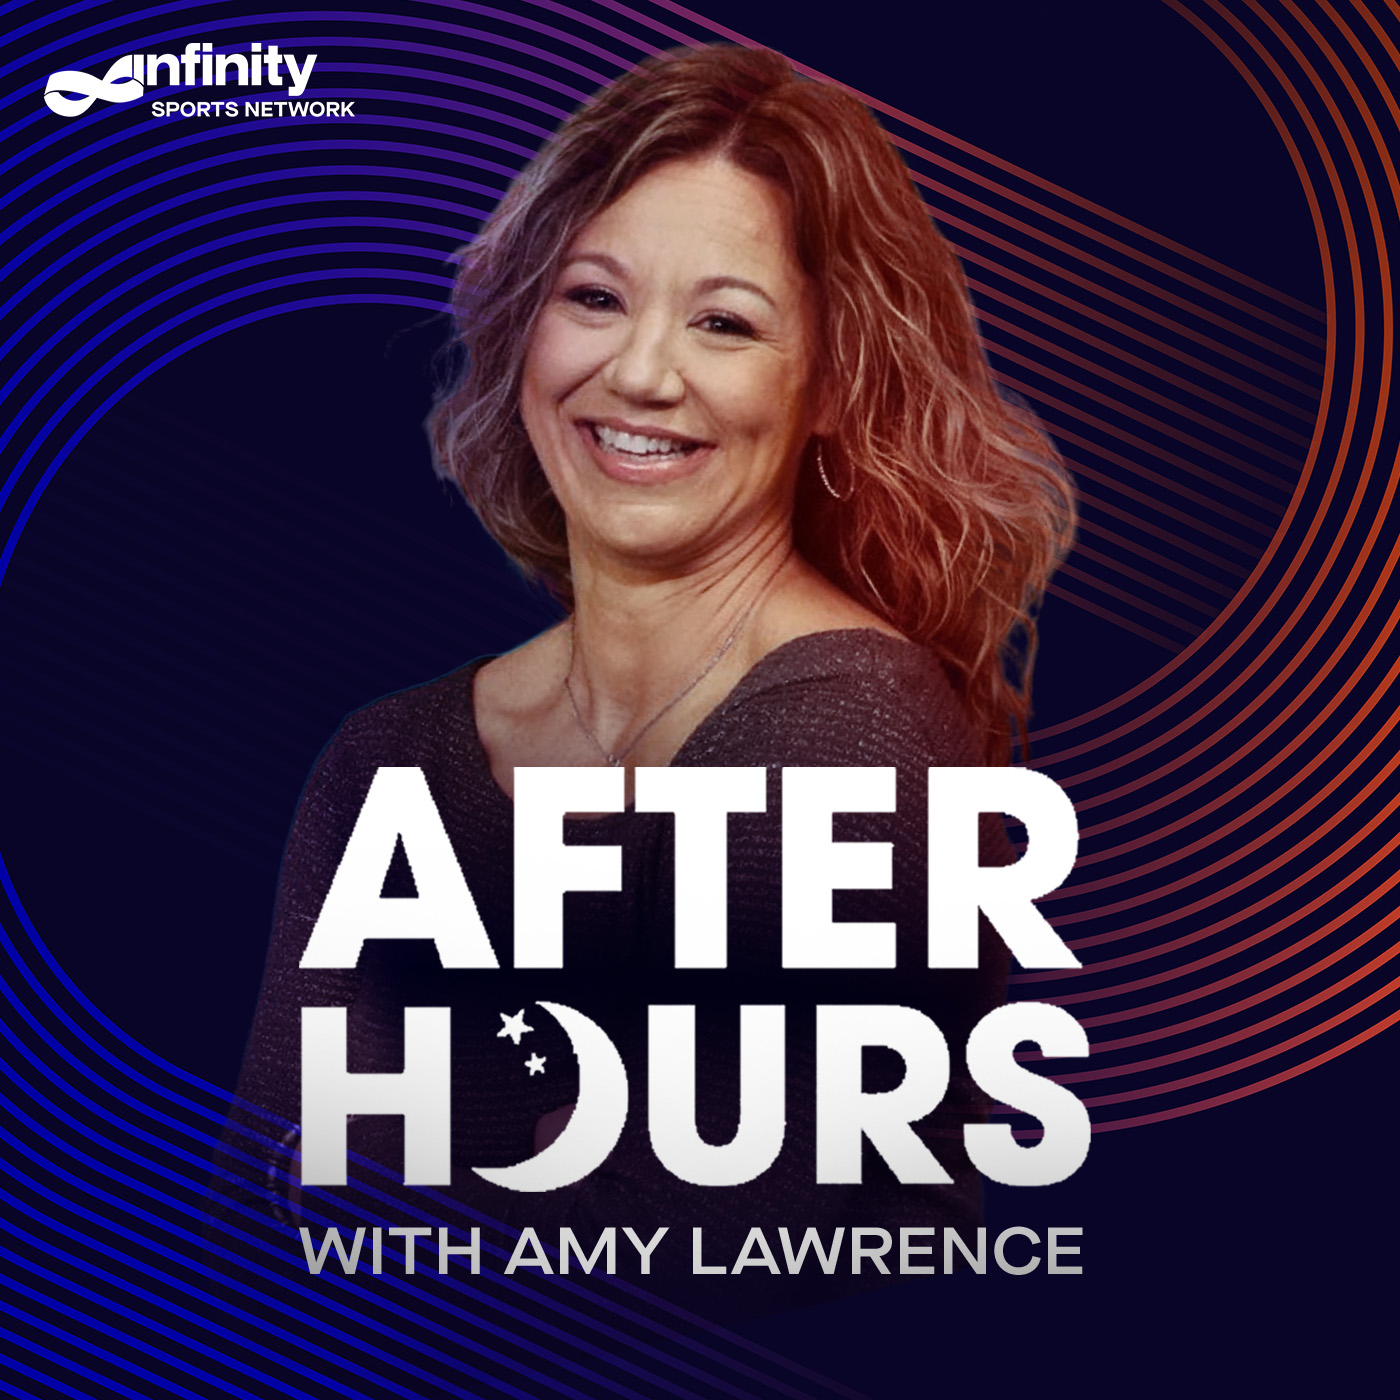 6/17/21 After Hours with Amy Lawrence PODCAST: Hour 1